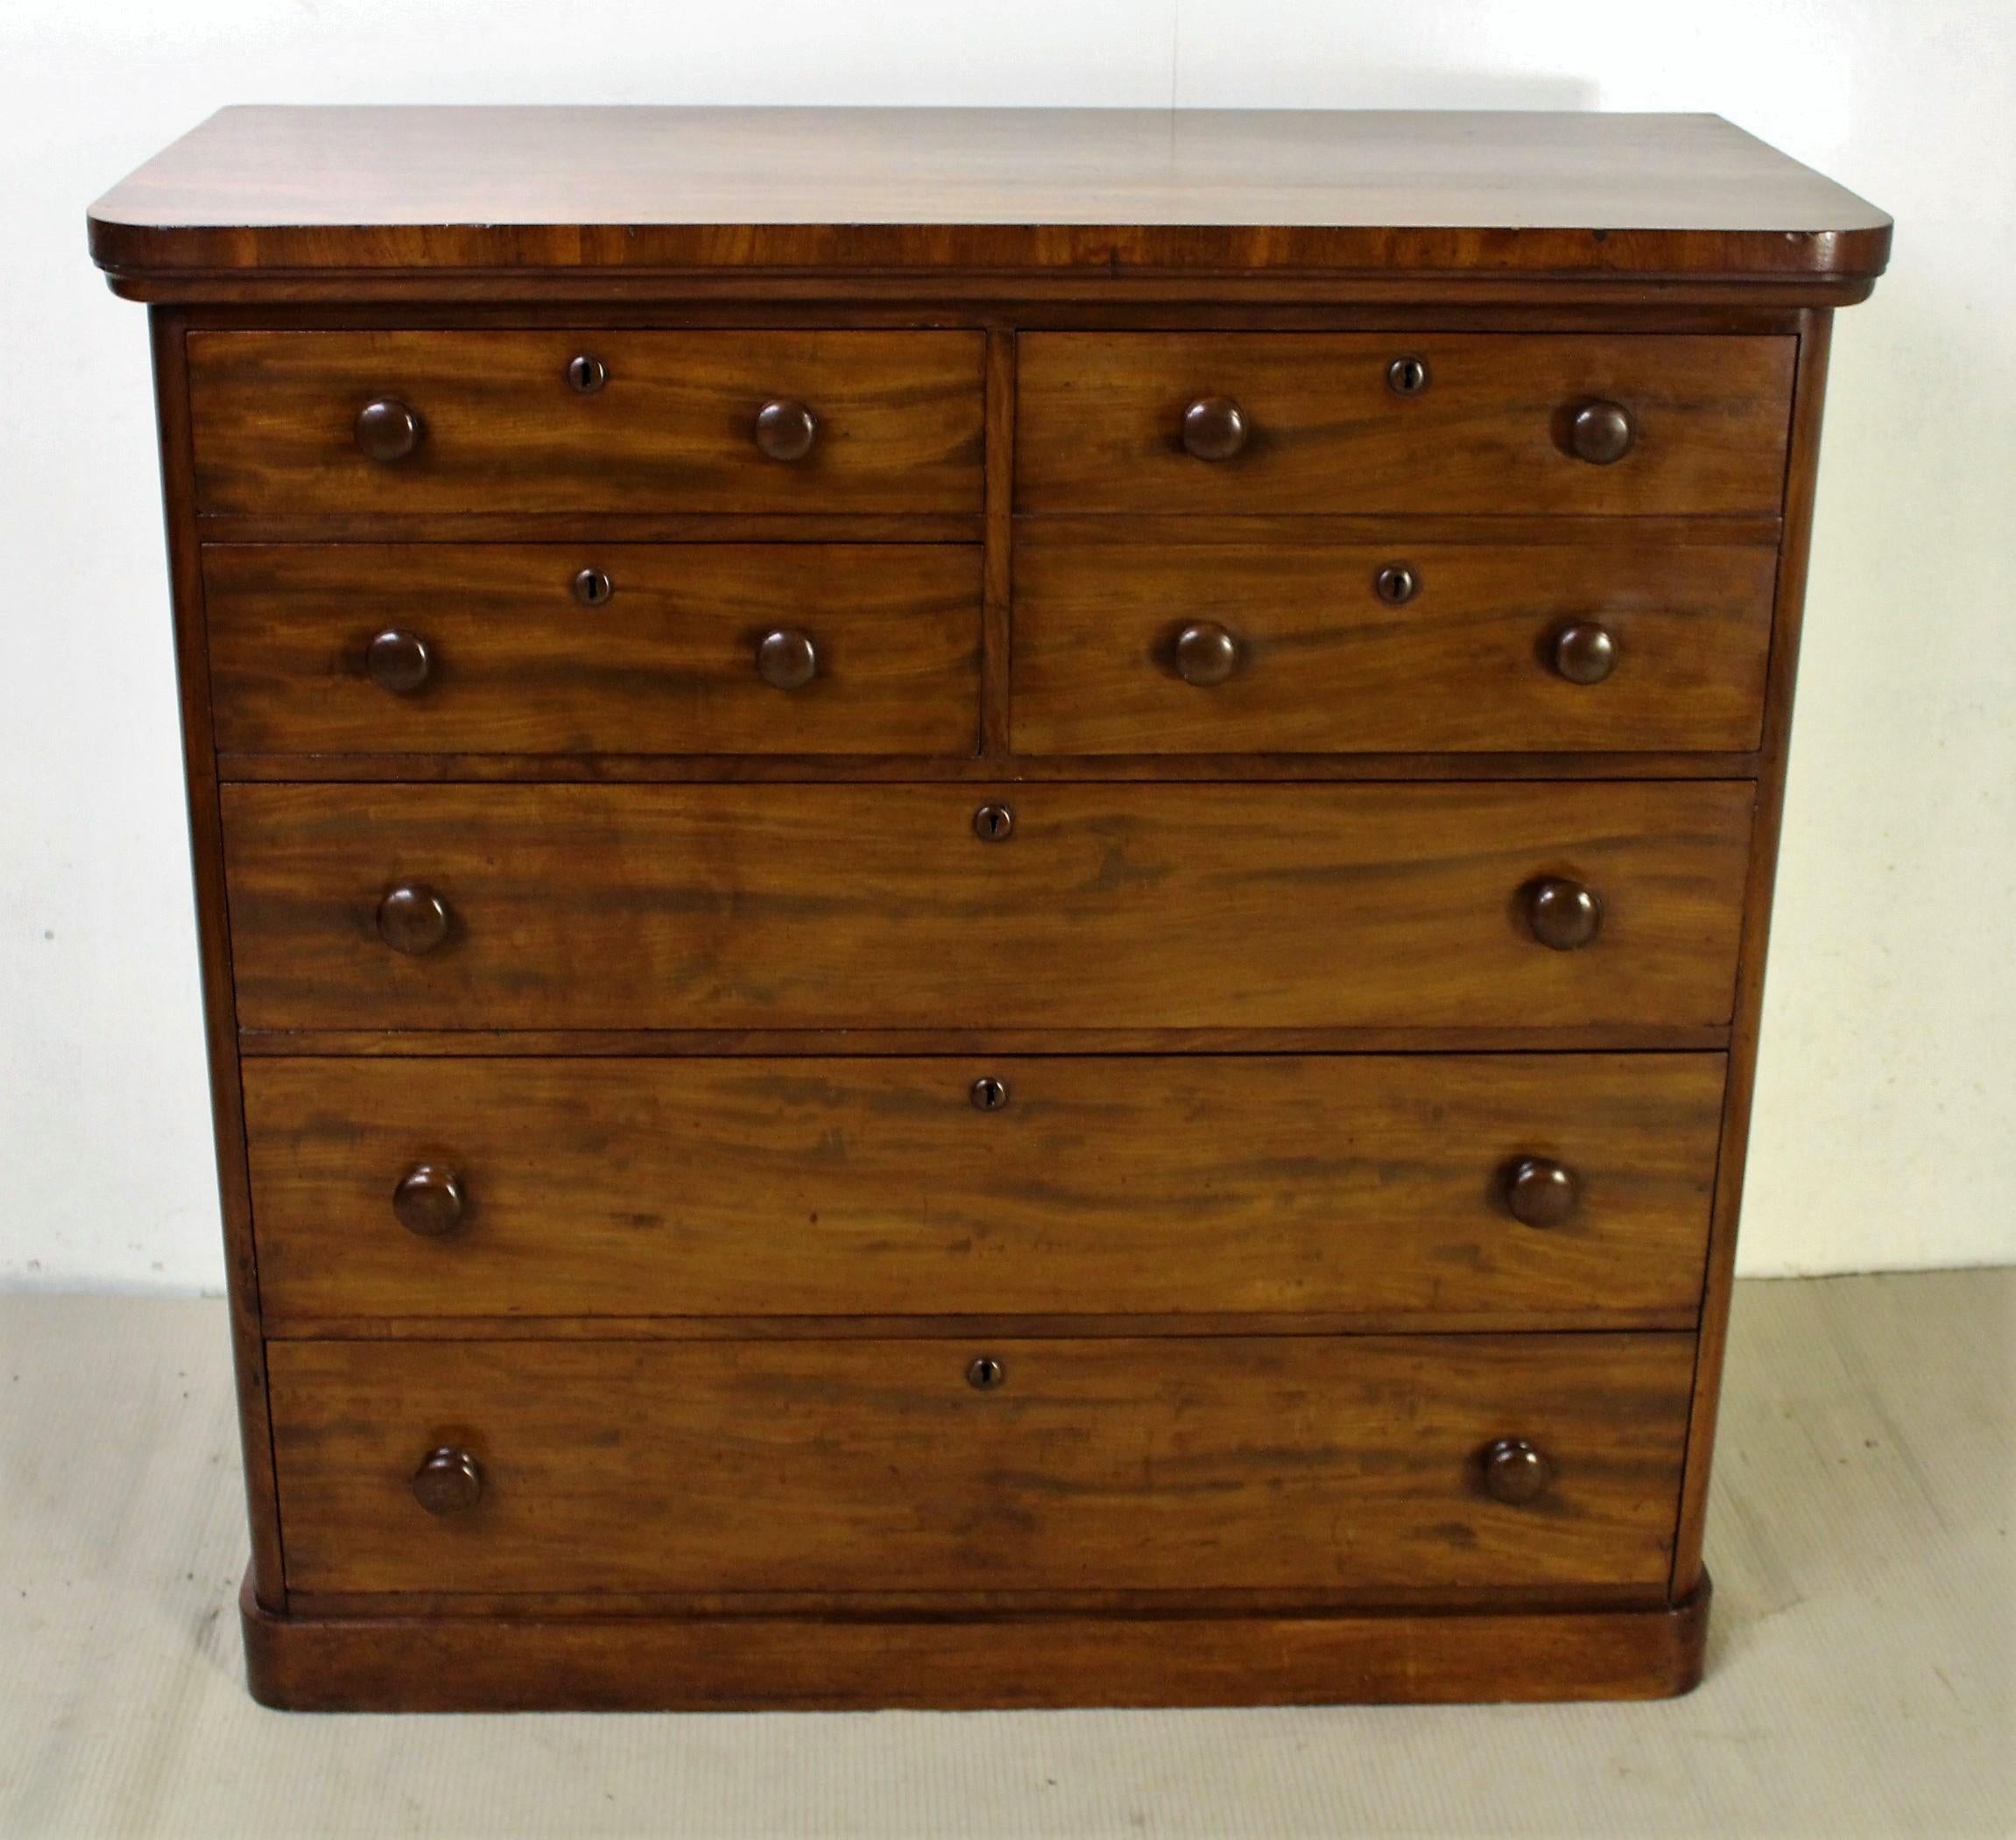 An excellent mid-Victorian period mahogany chest with an unusual arrangement of drawers. Very well constructed in solid mahogany with attractive mahogany veneers. Rather than the usual configuration of 2 short over 3 long drawers, this chest has 3